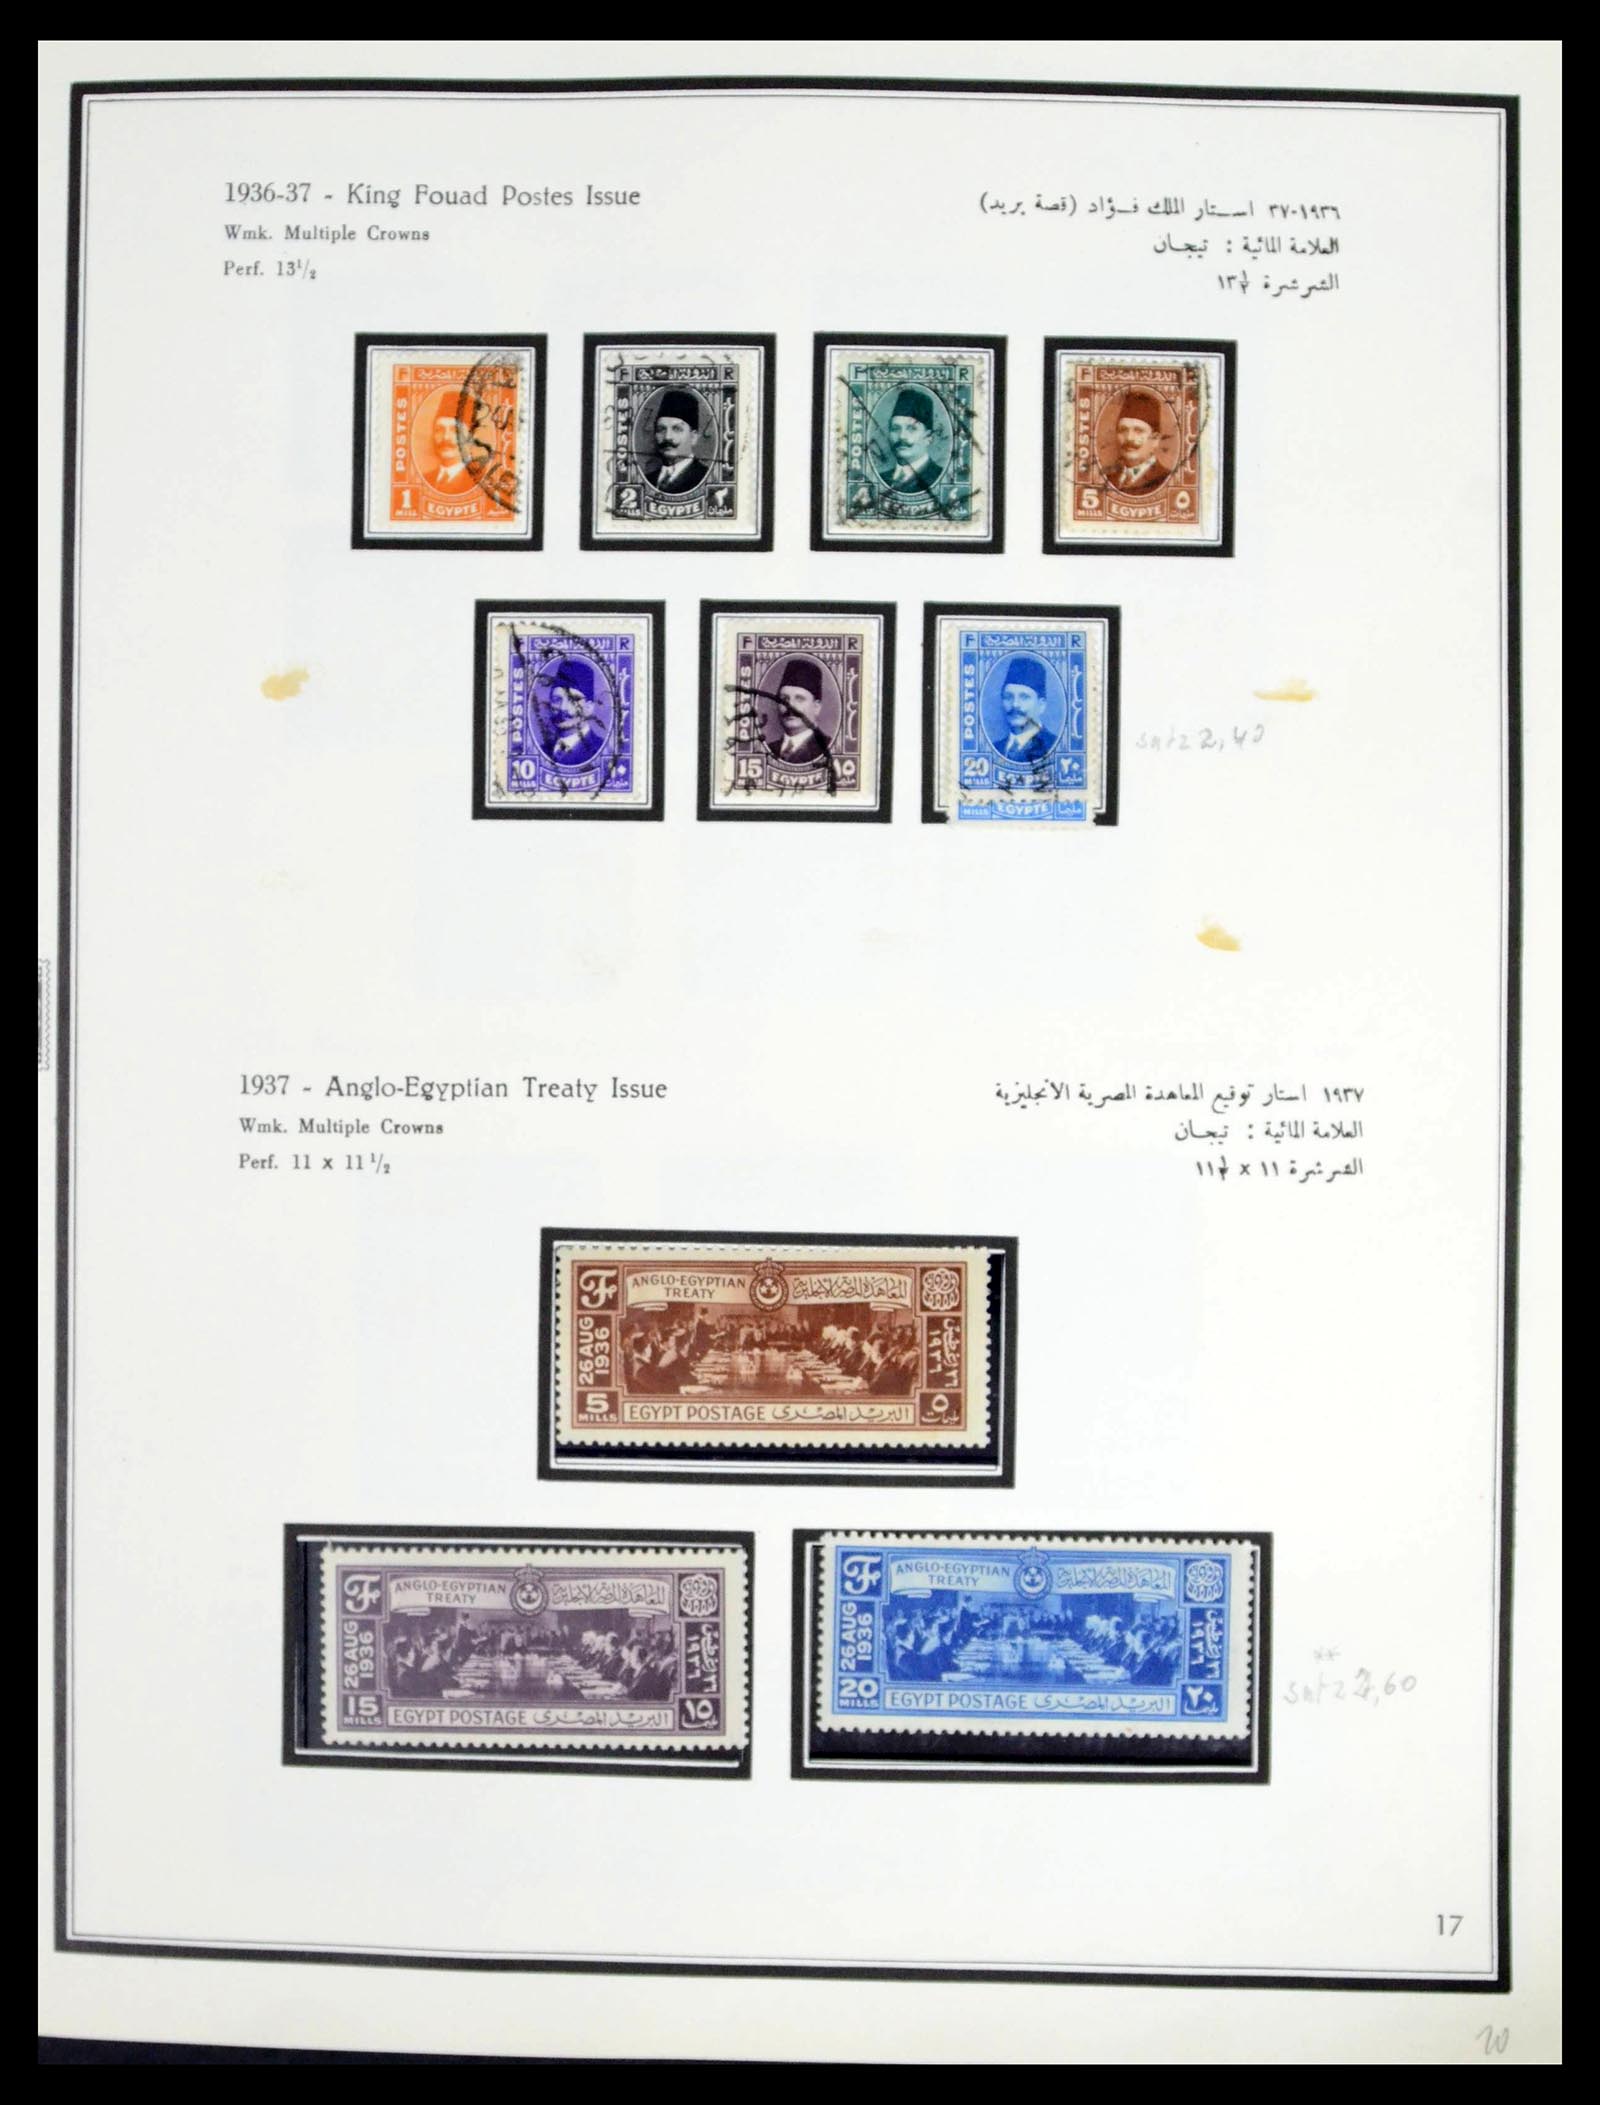 39437 0021 - Stamp collection 39437 Egypt 1866-1958.